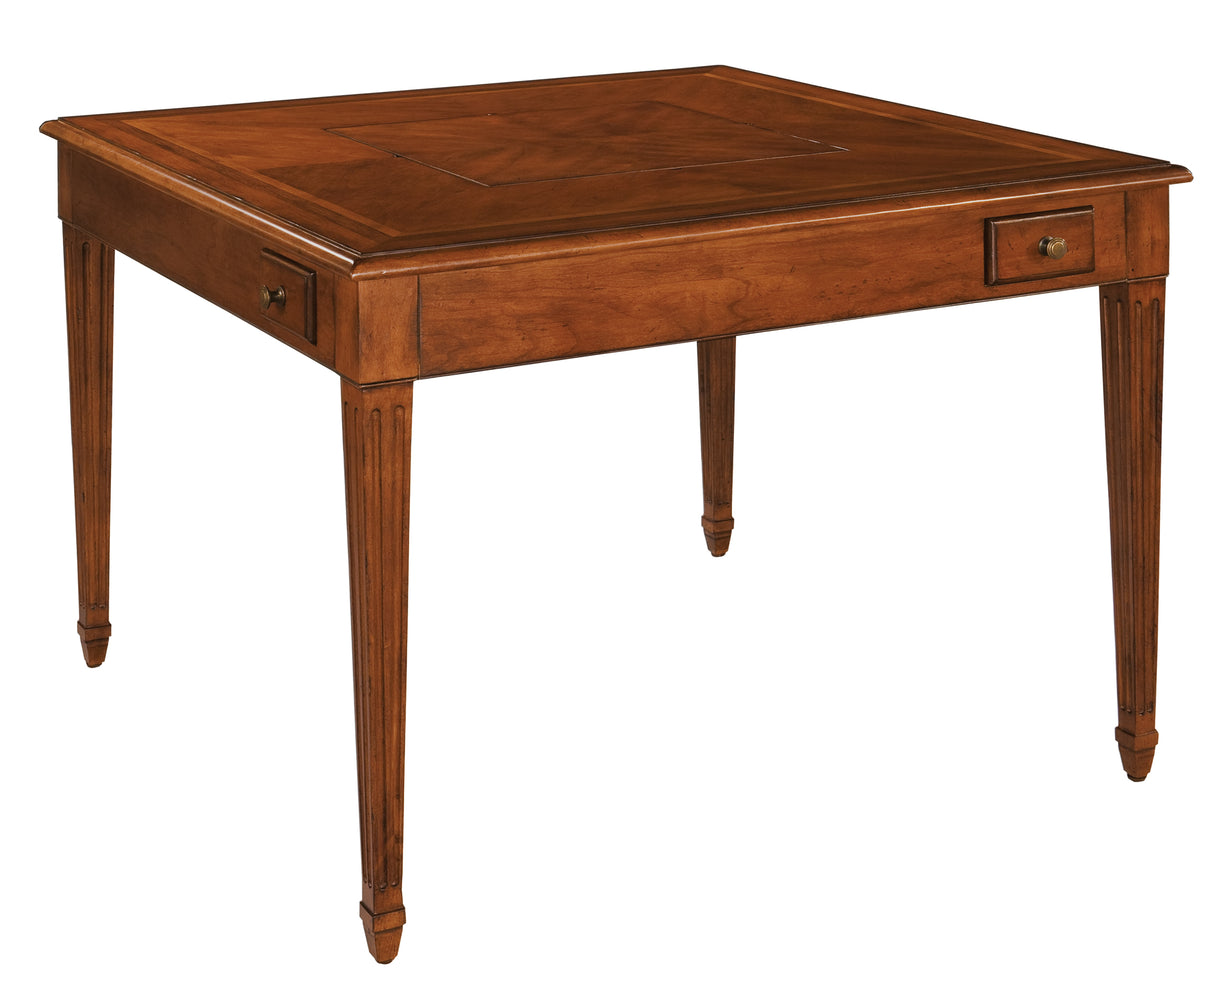 Hekman 11915 Accents 42in. x 42in. x 31.5in. Game Table